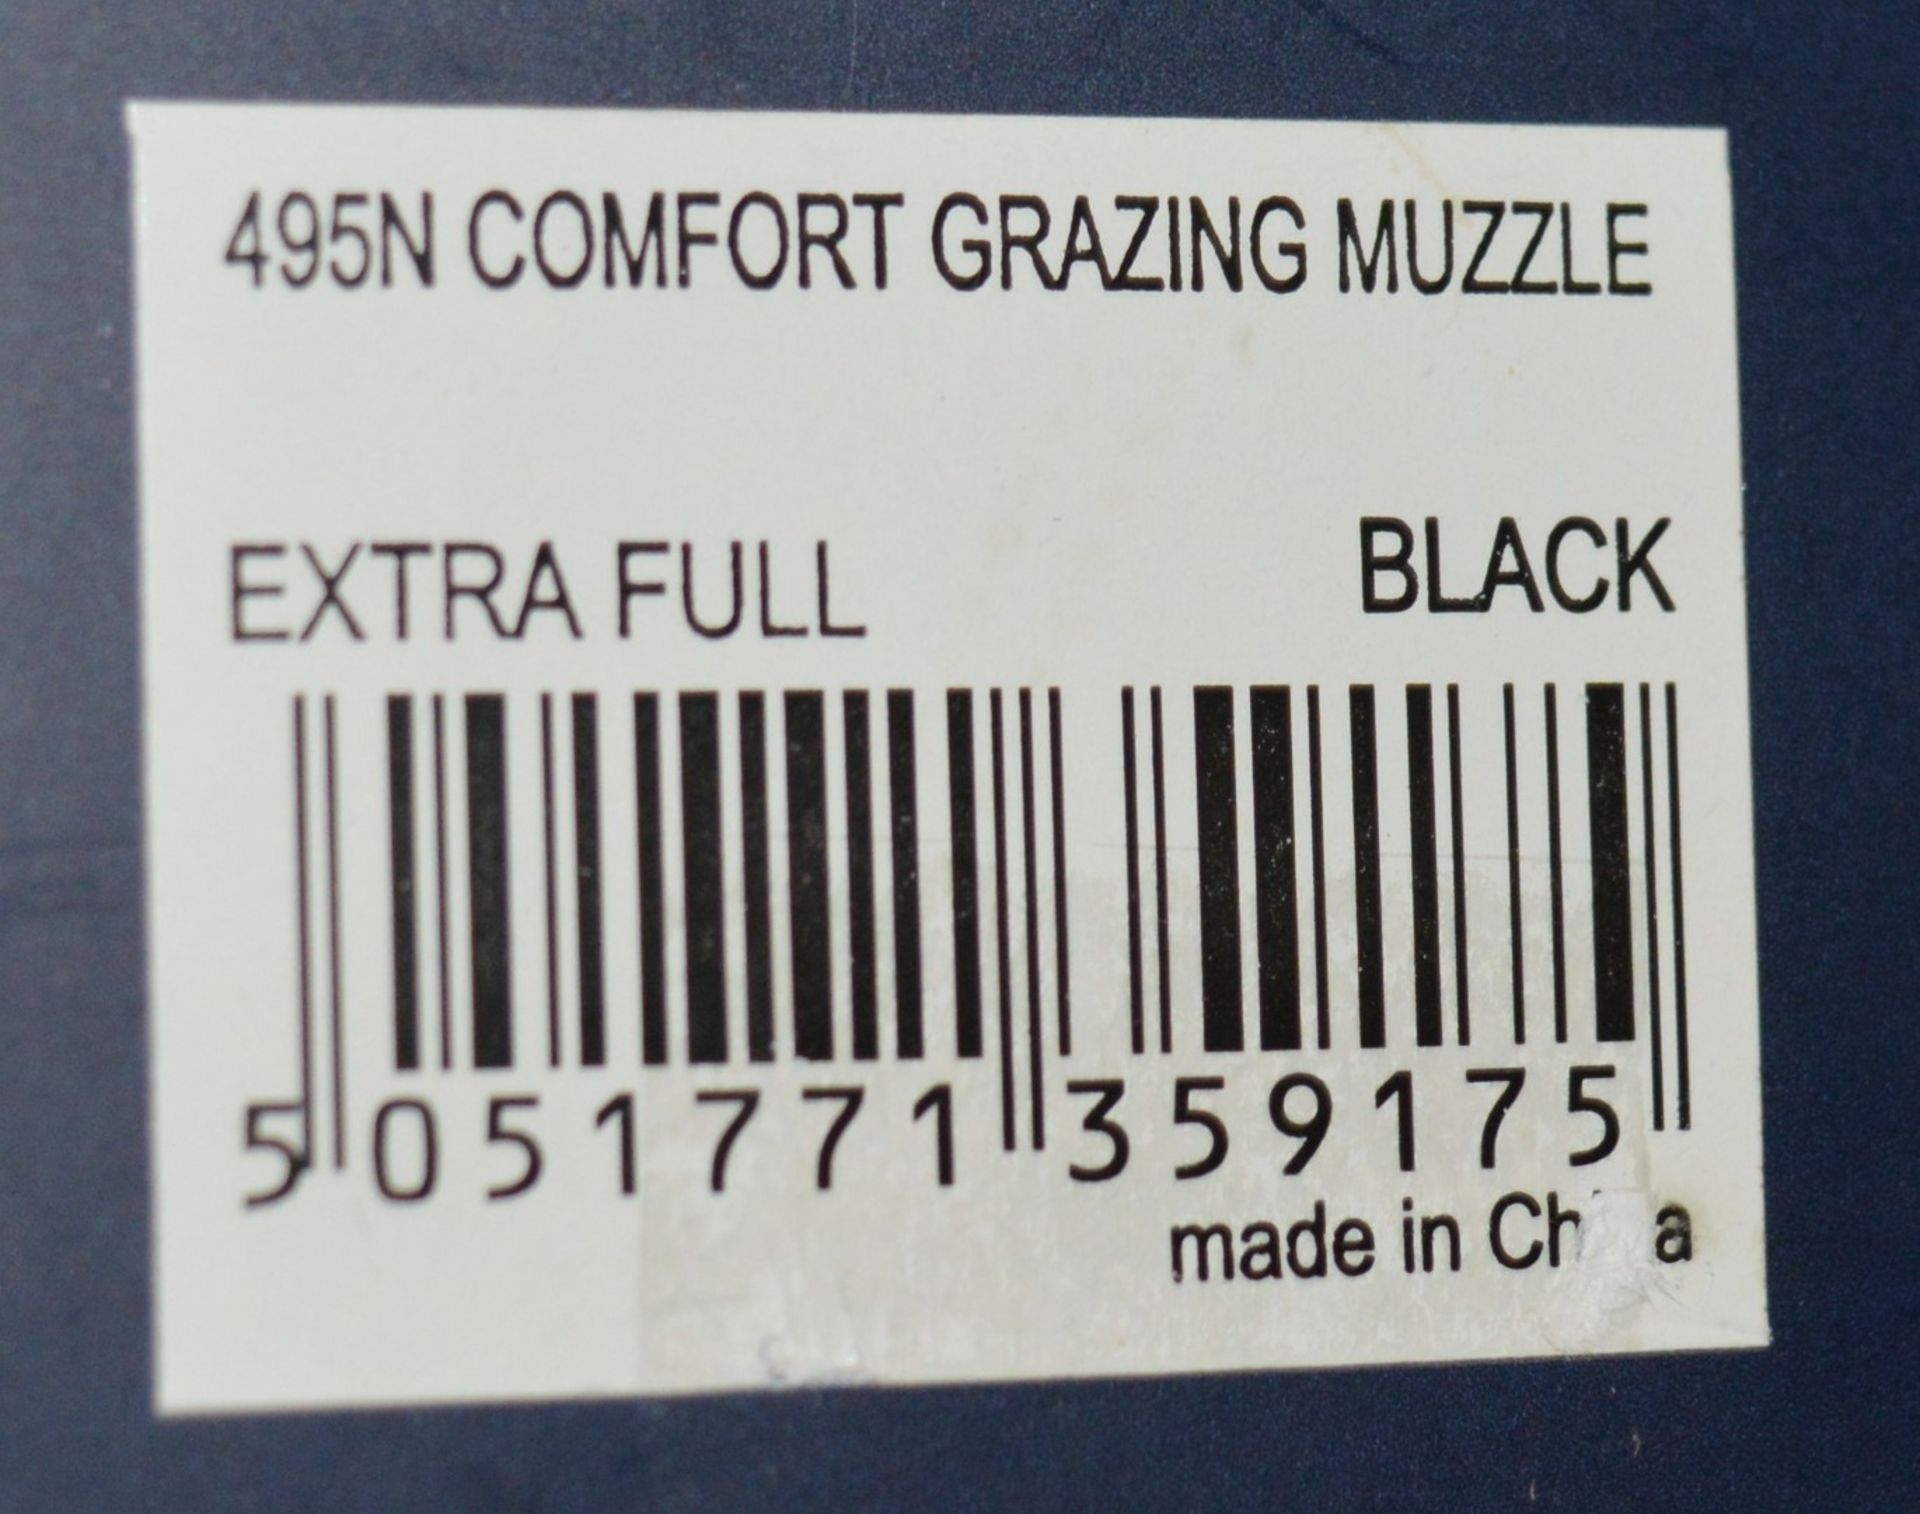 1 x Shires Comfort Grazing Muzzle - Extra Full 495N Black - New Stock - CL401 - Ref J893 - Location: - Image 3 of 3